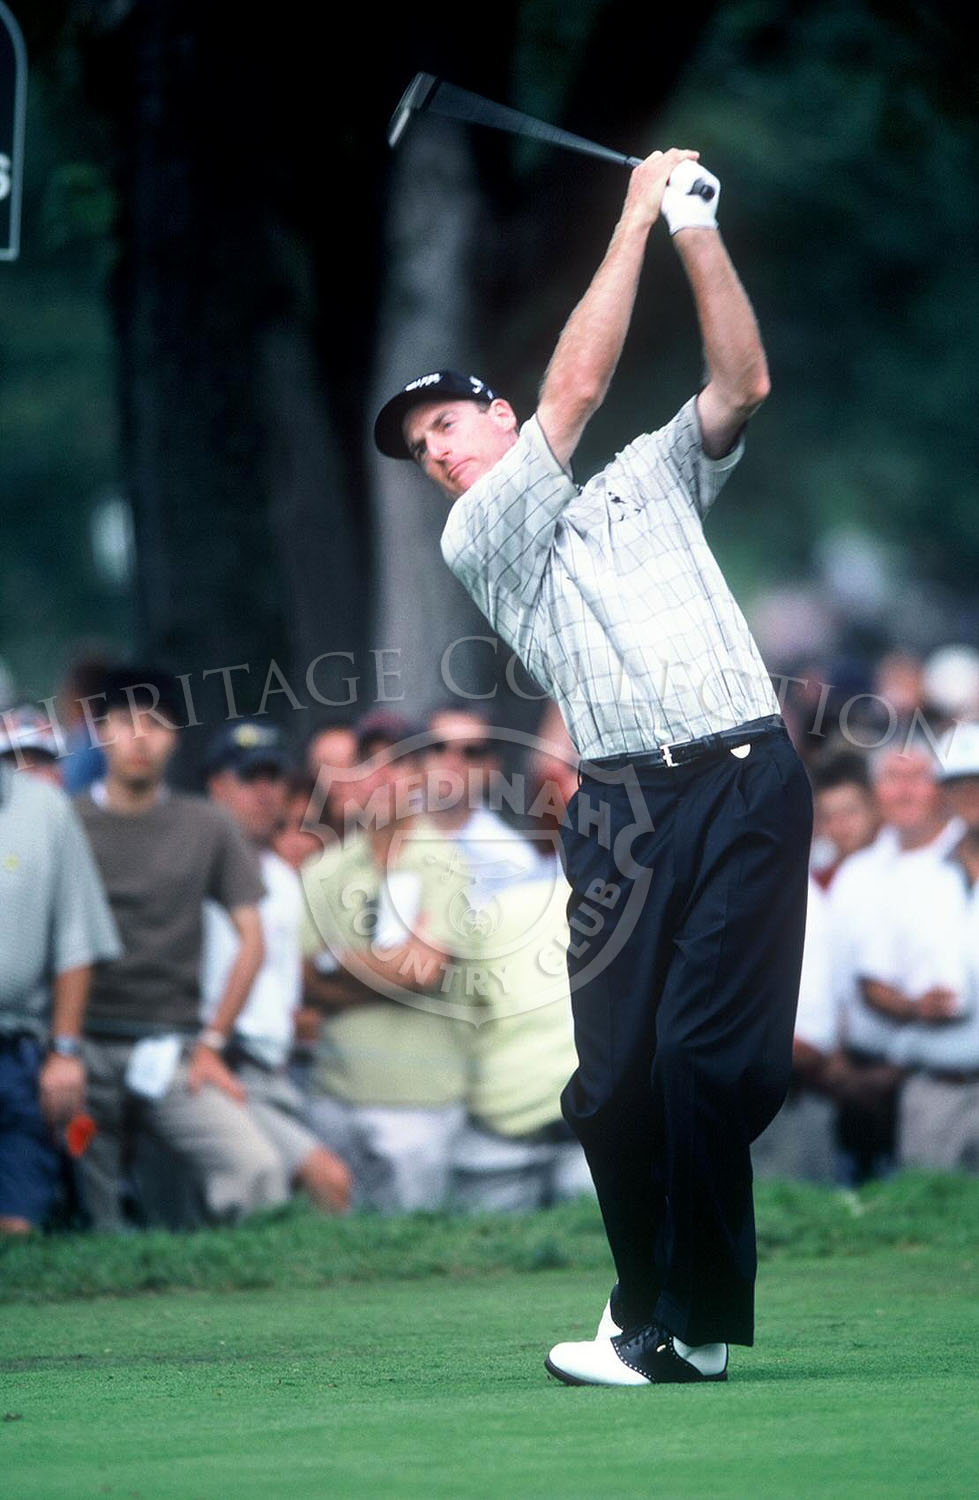 On his way to tie for 8th place with Steve Pate, Jim Furyk uses one of his irons to send the ball closer to a green on Course No. 3. He finished the 81st PGA with a 284.